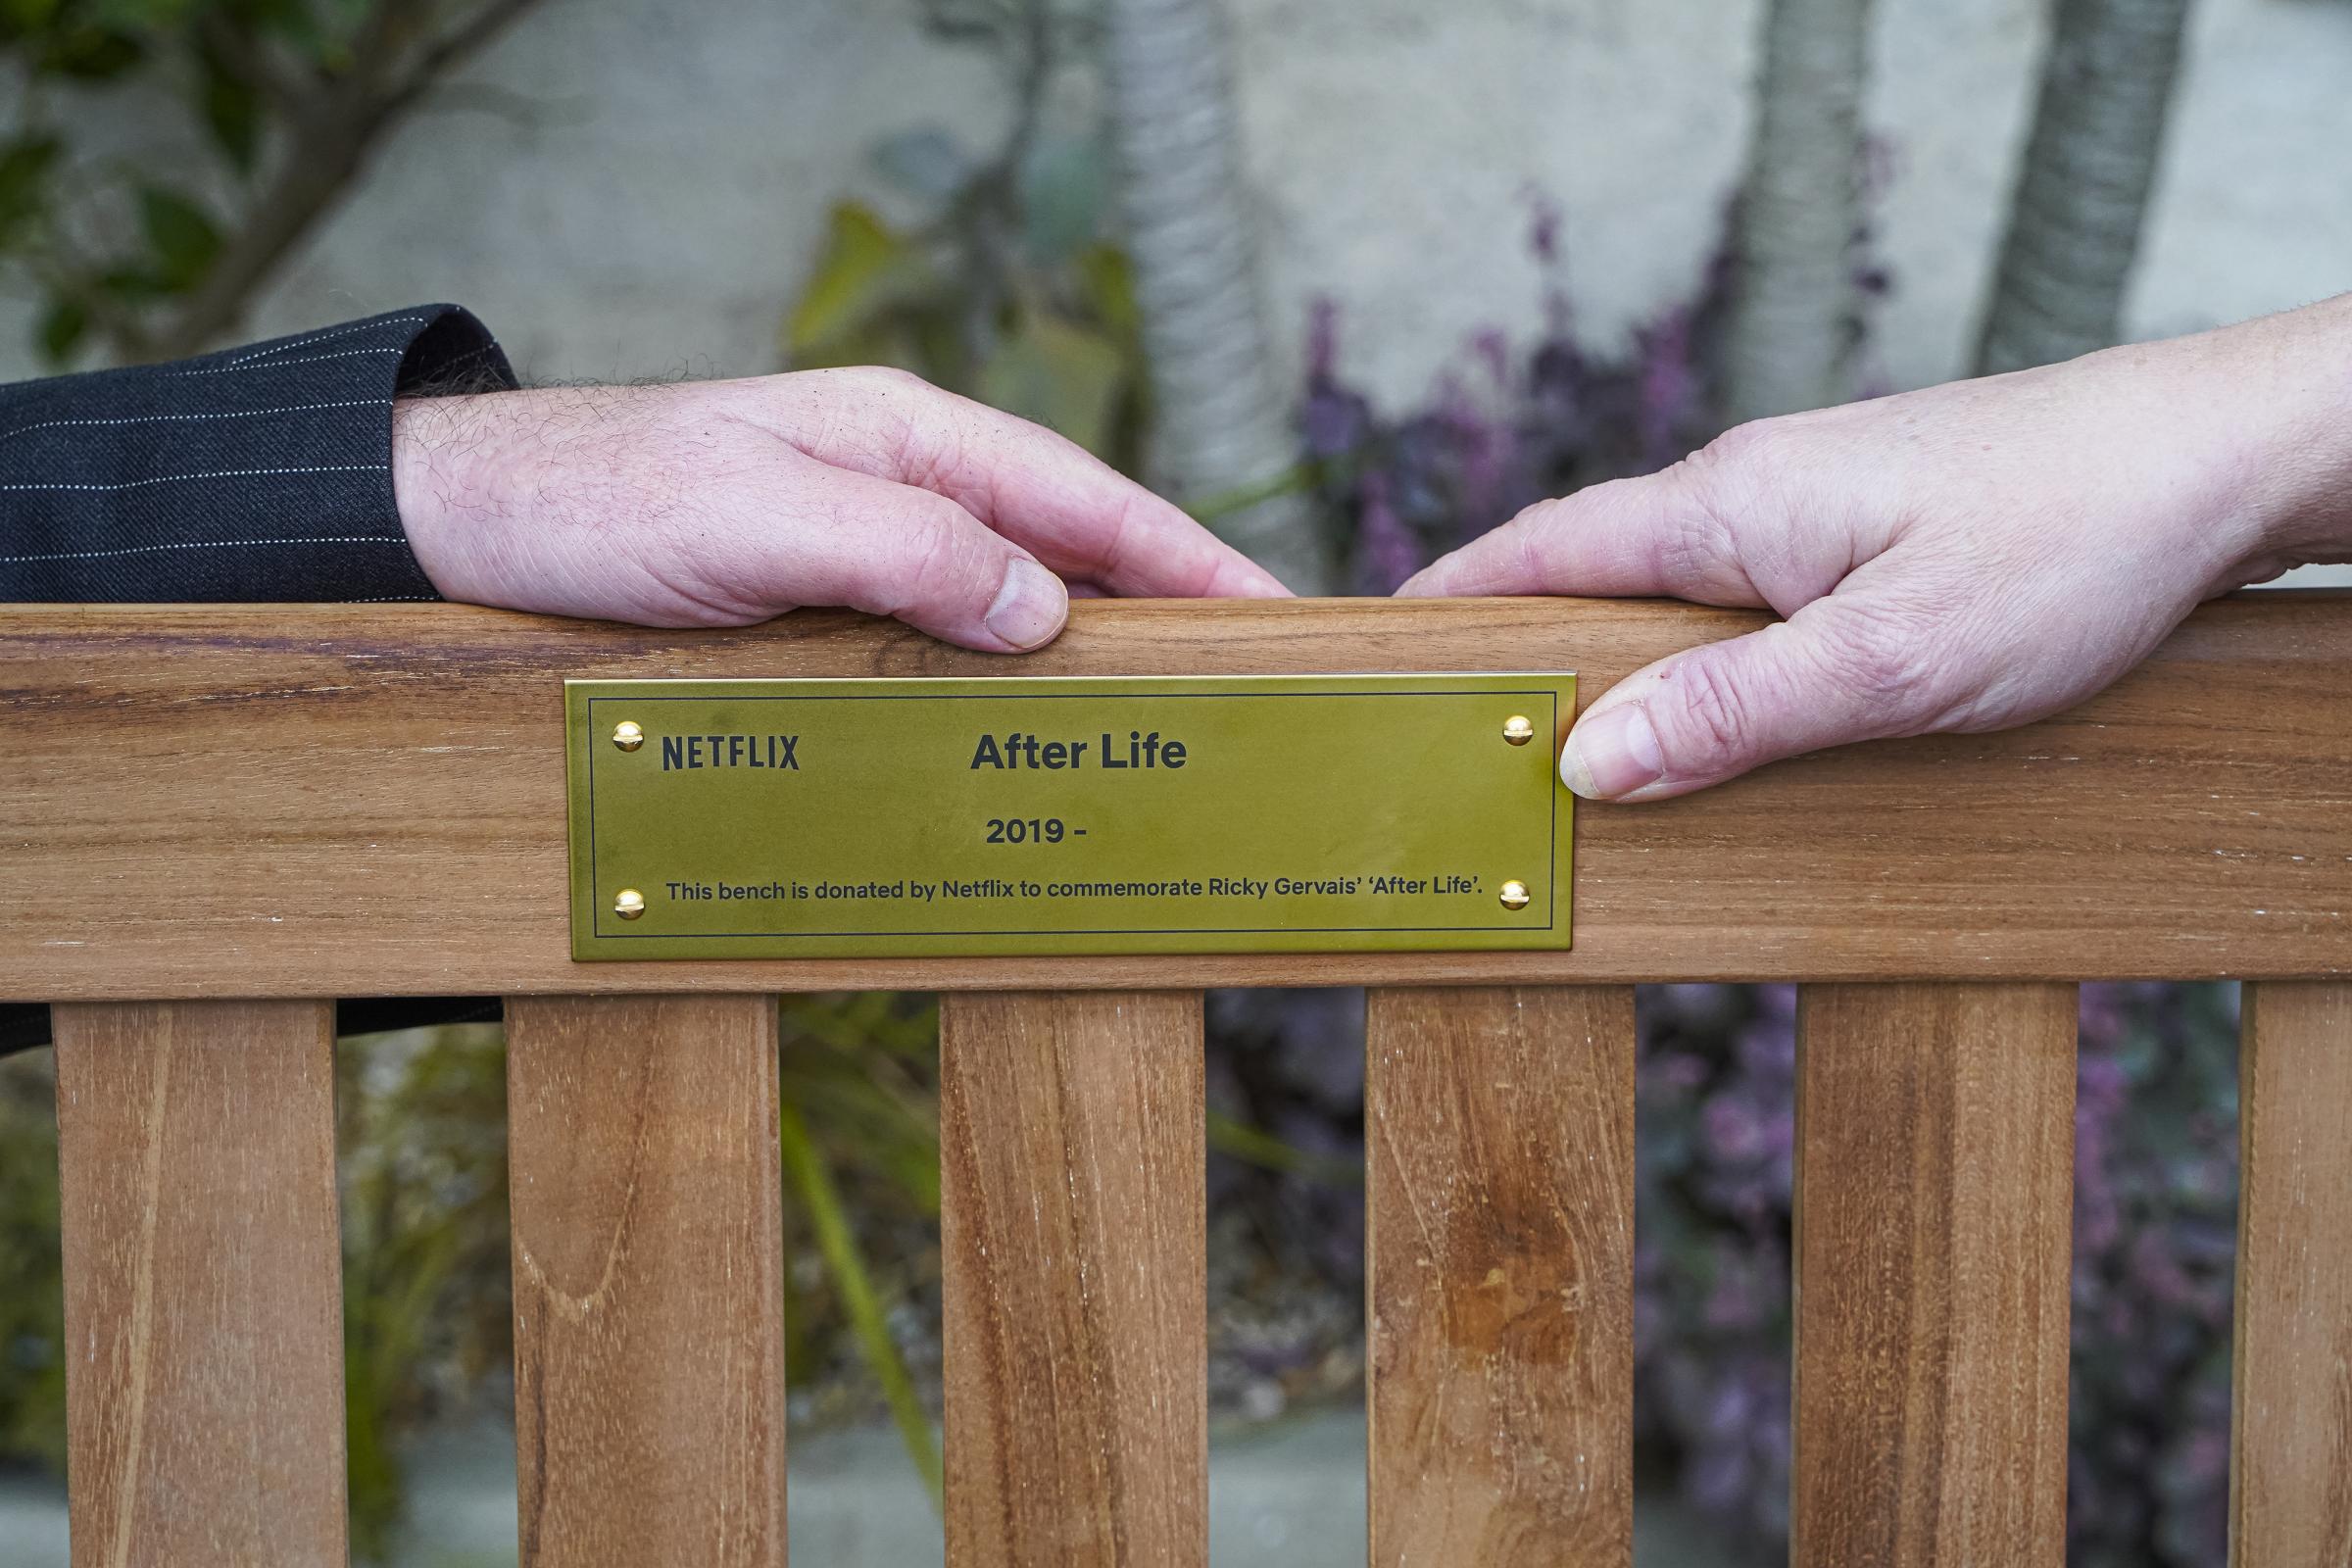 FALMOUTH, CORNWALL, JANUARY 18 2022 : Netflix donated ÔAfterlifeÕ bench positioned by Falmouth Town Council at Princess Pavilions/Gyllyngdune Gardens. Photographed for Falmouth Town Council by by Hugh Hastings.